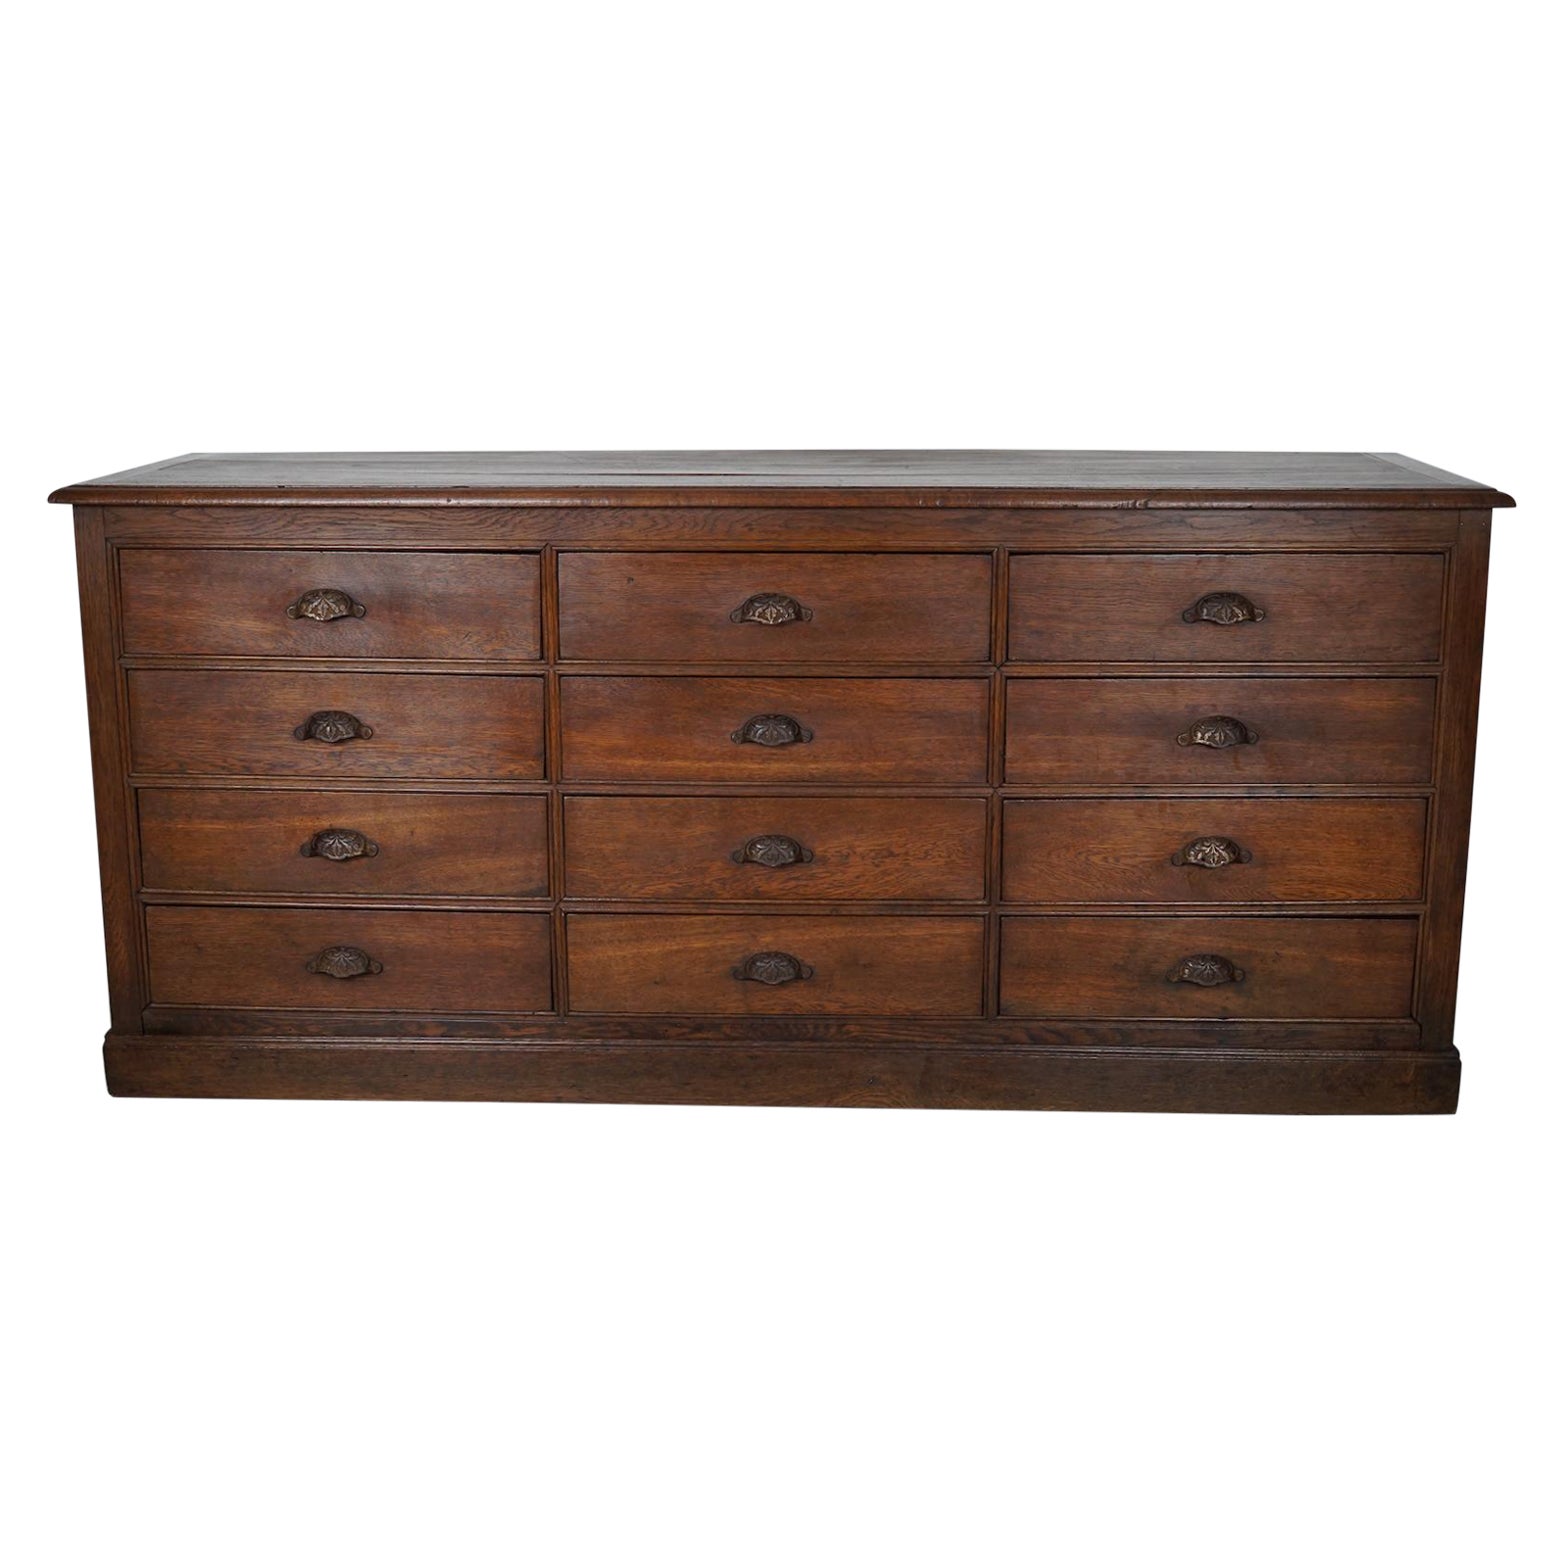 Antique French Oak Apothecary / Filing Cabinet, 19th Century For Sale